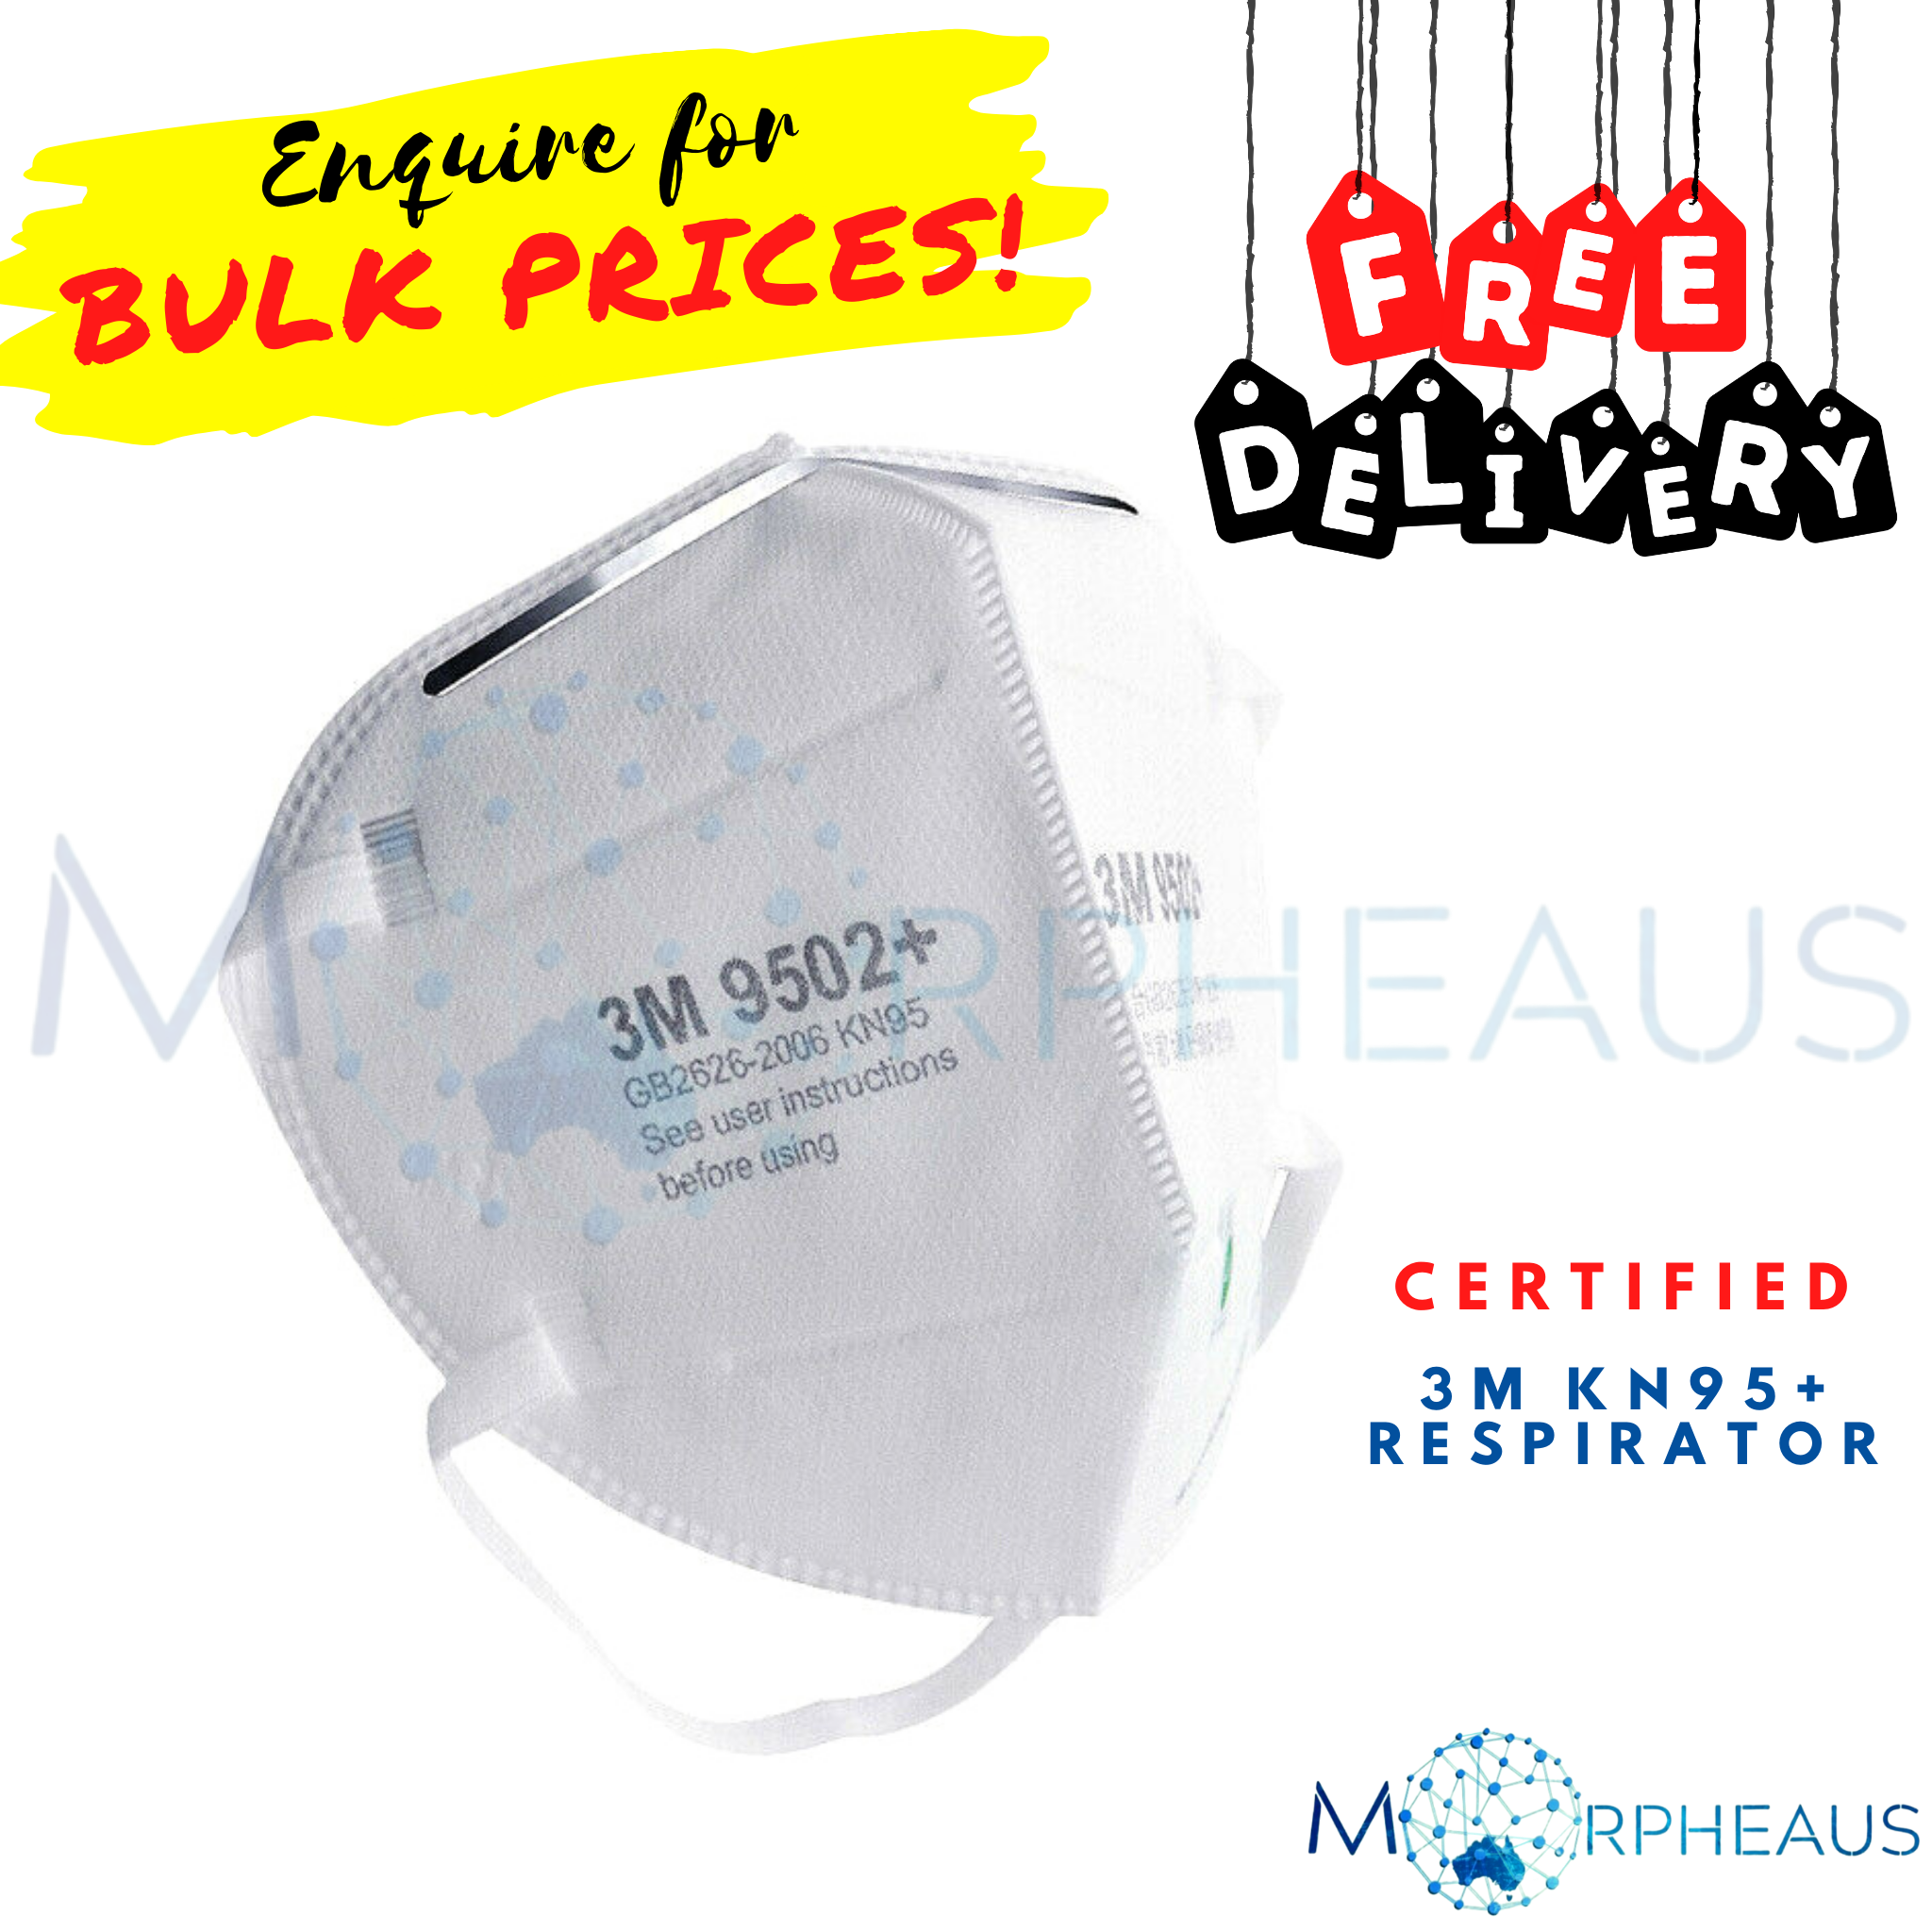 **FREE DELIVERY** 3M - KN9502+ Face Mask